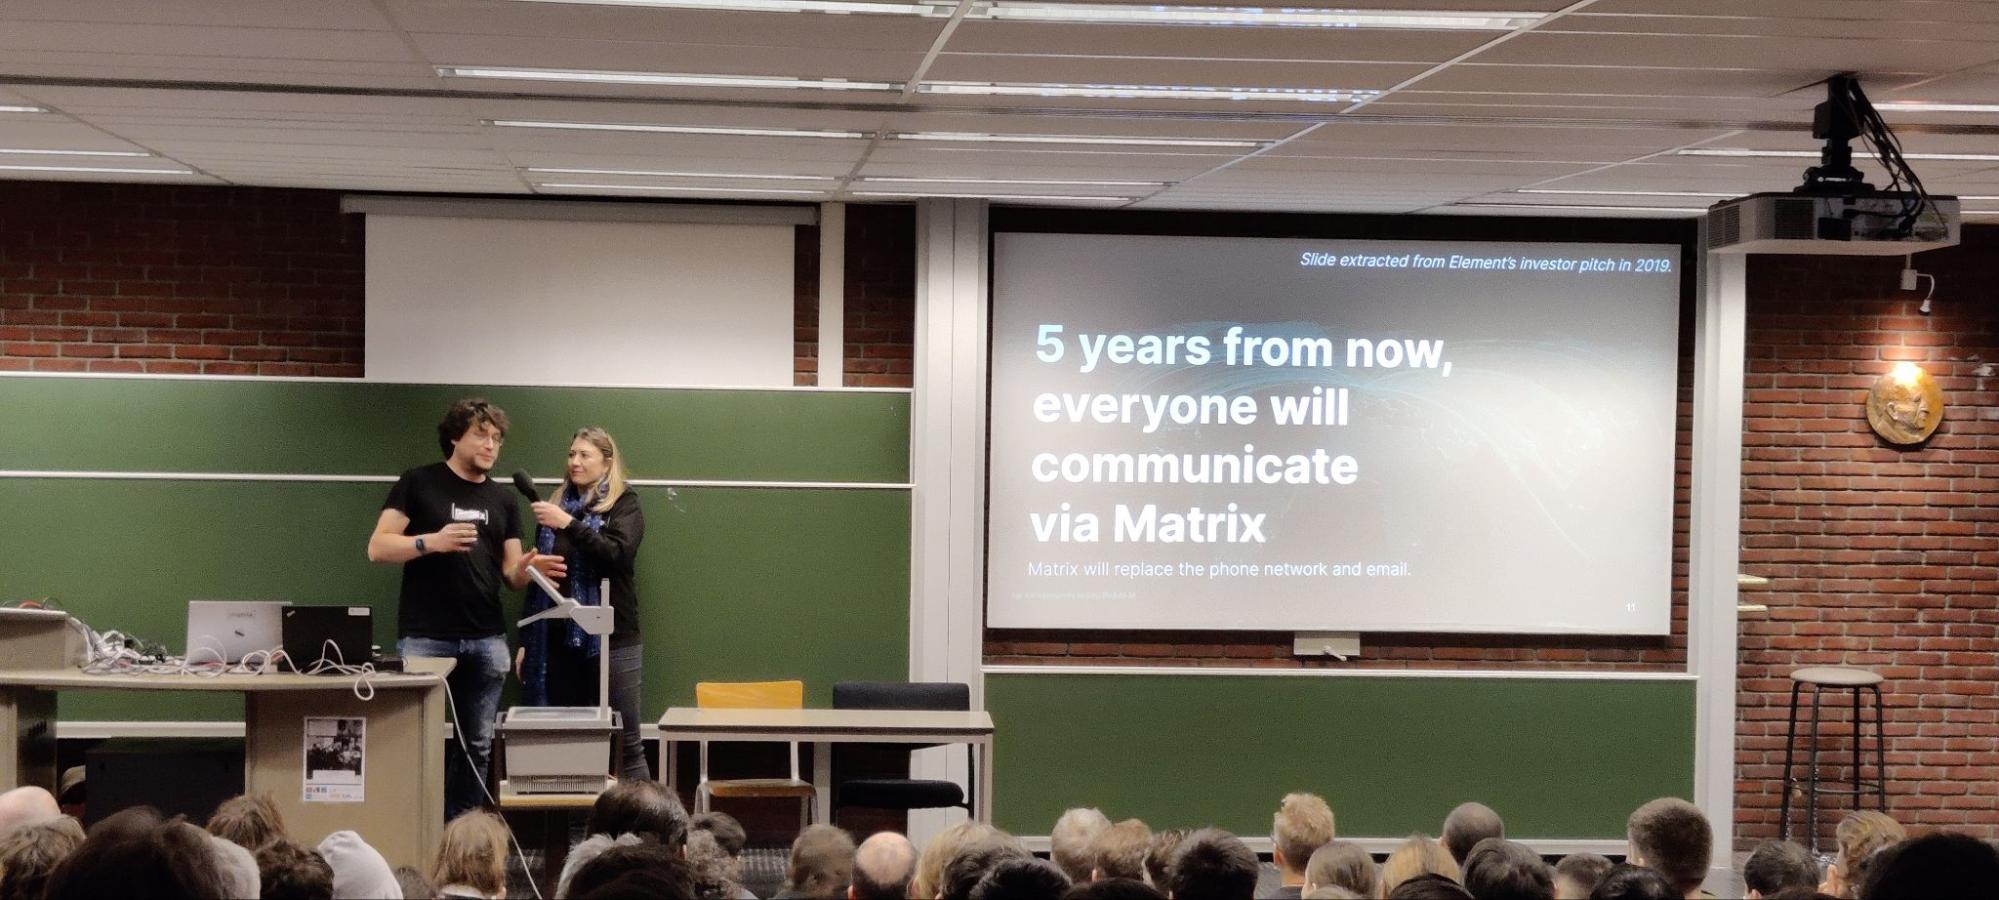 A picture of Matthew and Amandine in front of a classroom with a wide audience. Amandine is holding the mic for Matthew. Their slides are projected, and we can ready "5 years from now, everyone will communicate via Matrix"